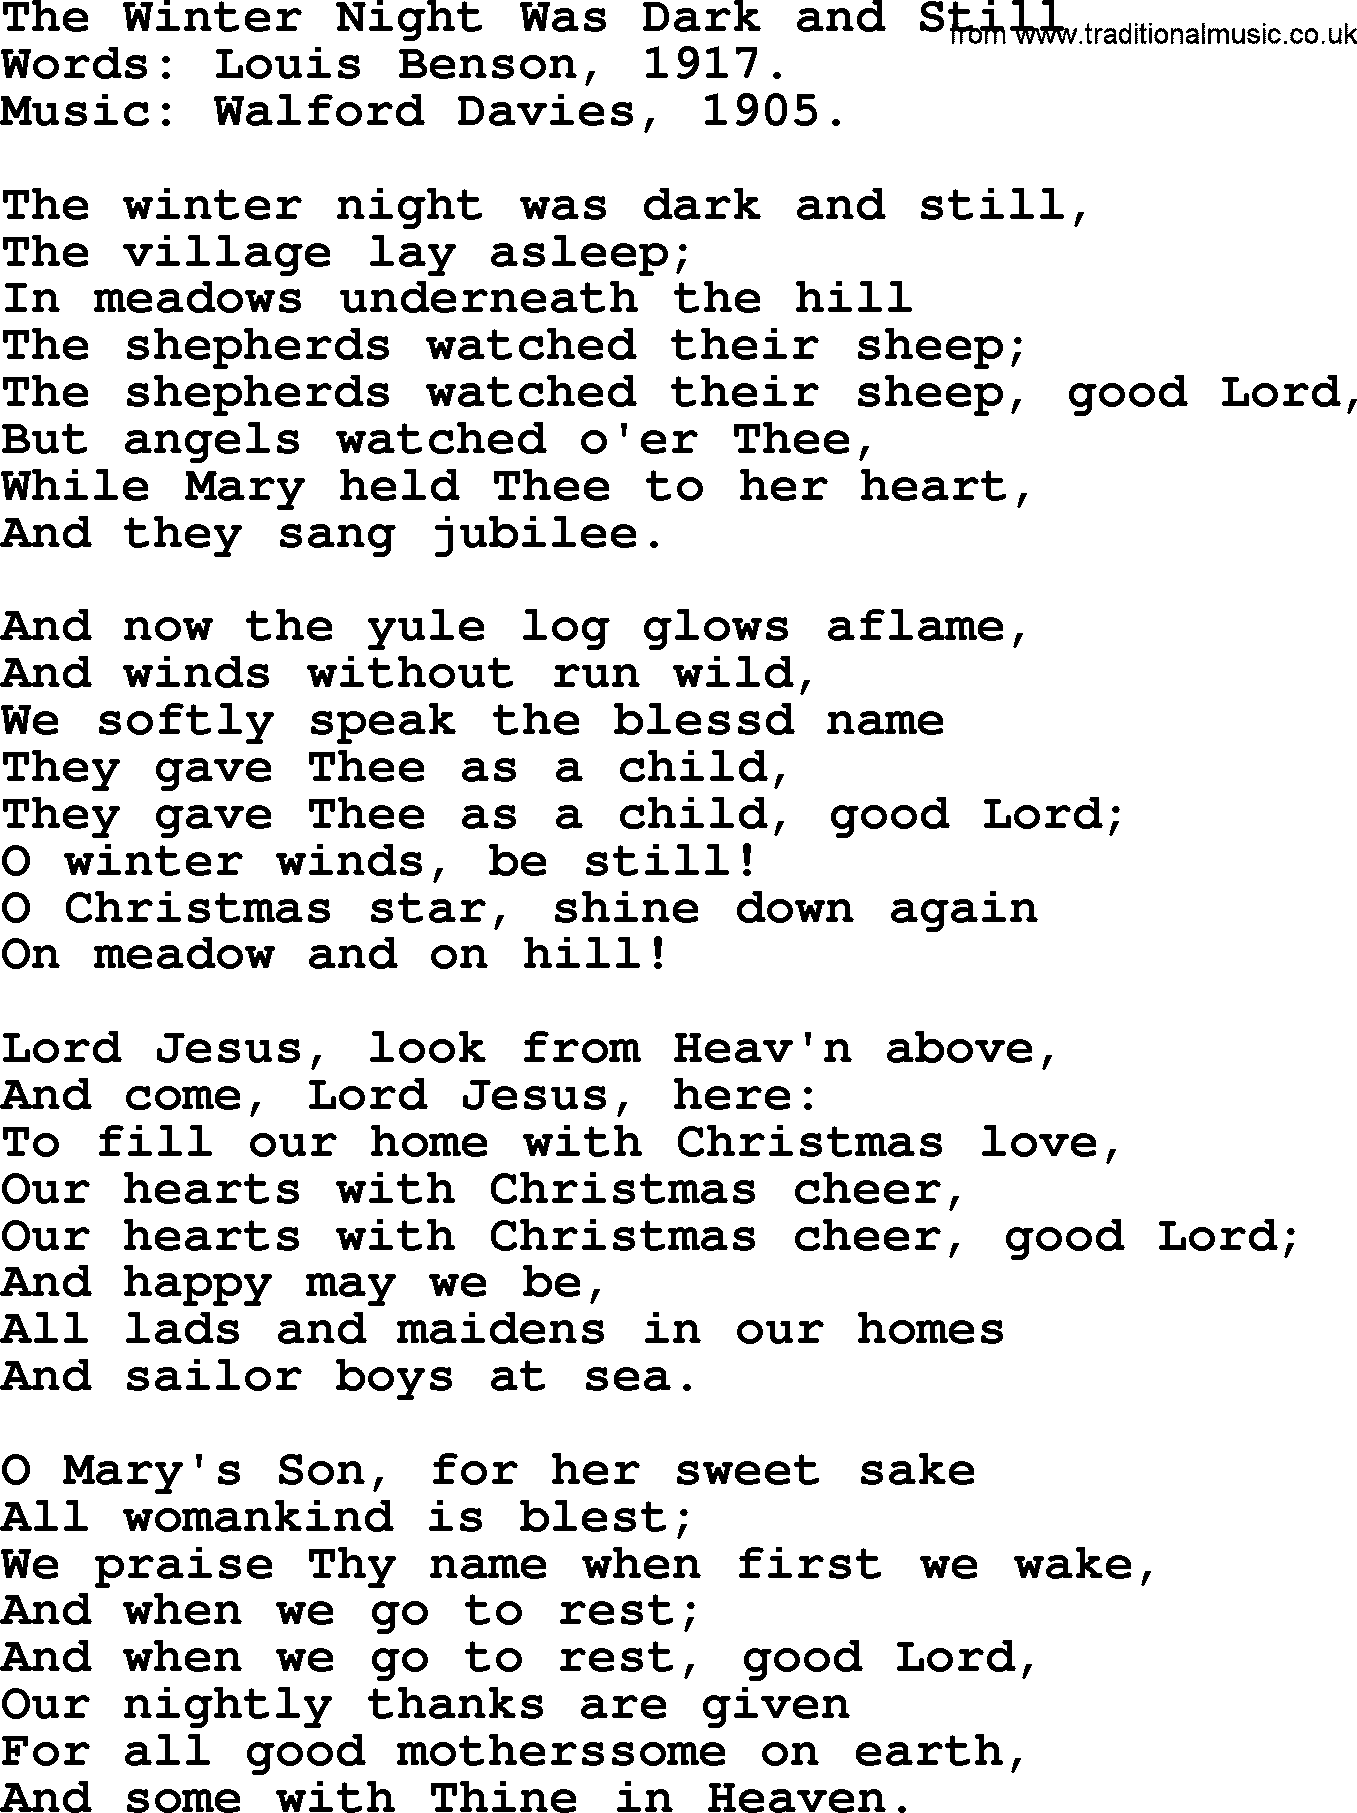 Christmas Hymns, Carols and Songs, title: The Winter Night Was Dark And Still, lyrics with PDF